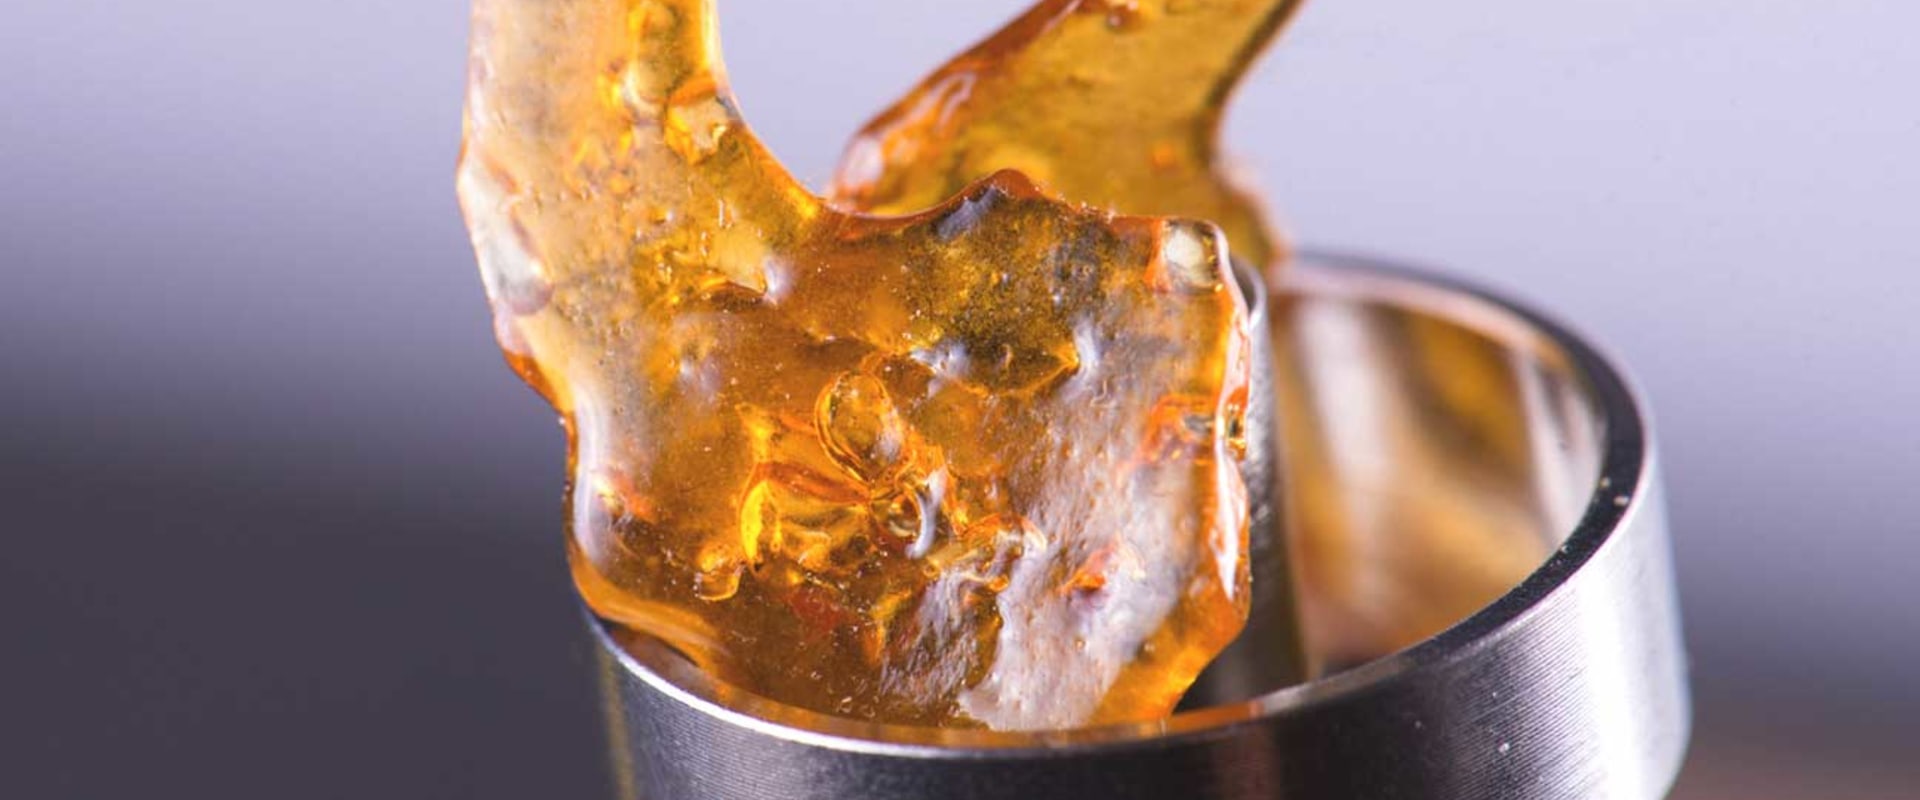 What are the effects of wax thc?